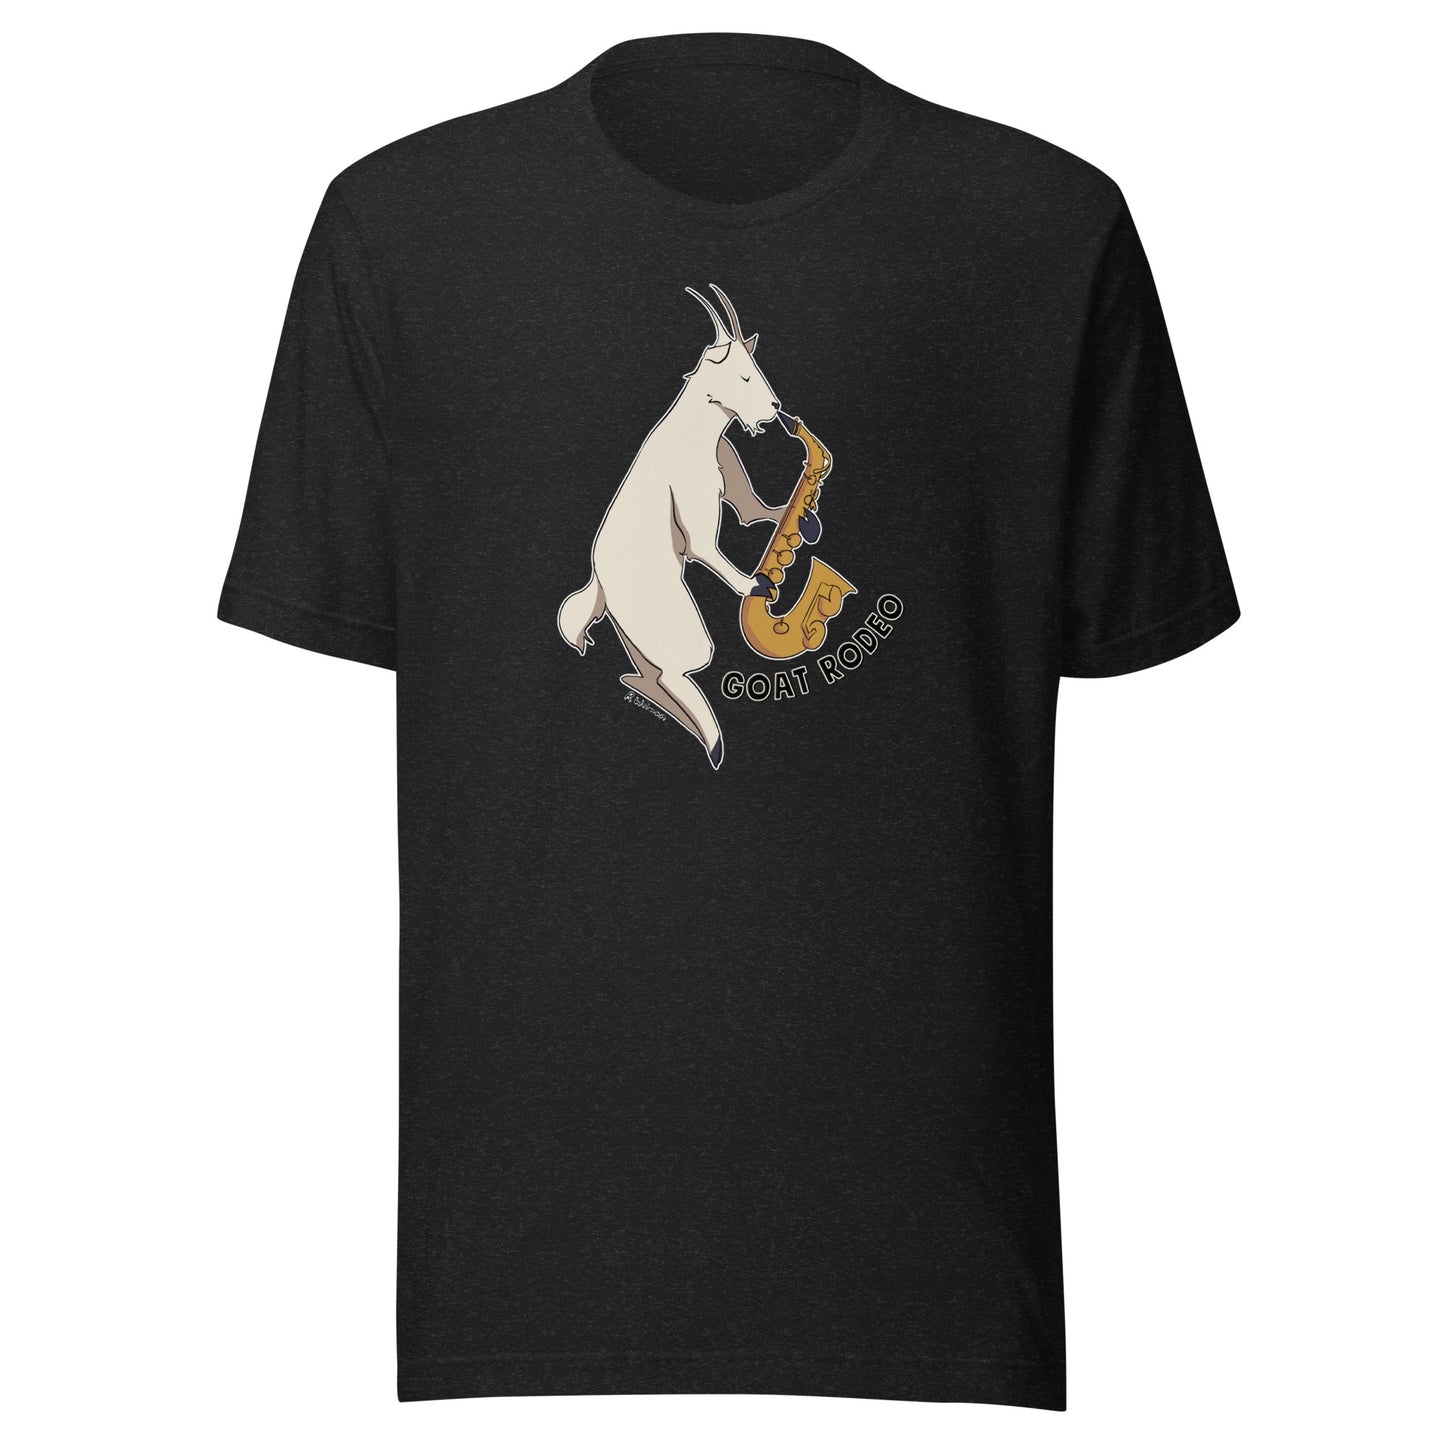 Goat Rodeo Illustrated T-Shirt